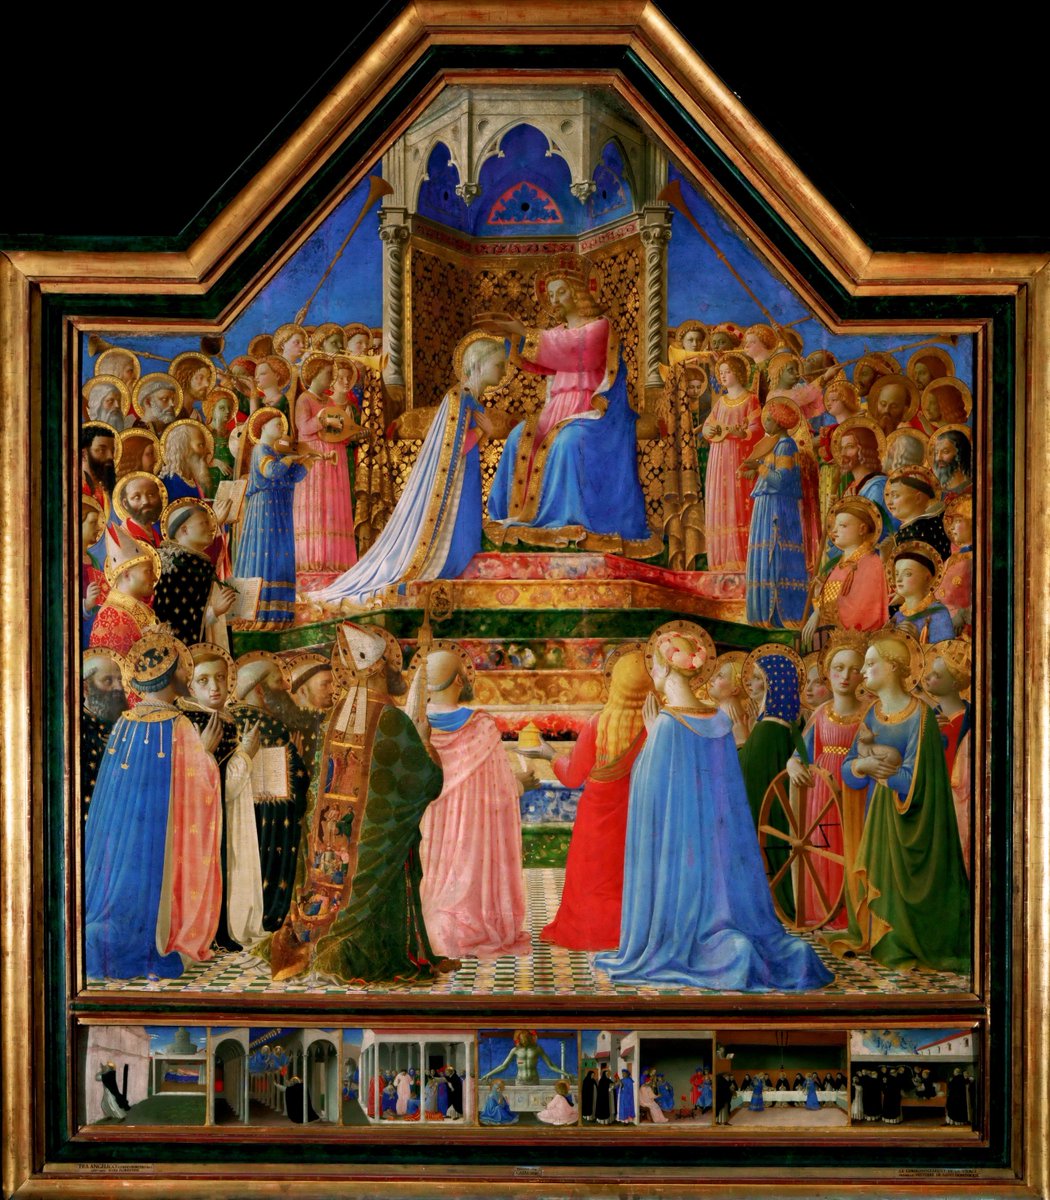 'Coronation of the Virgin' - Fra Angelico #painting